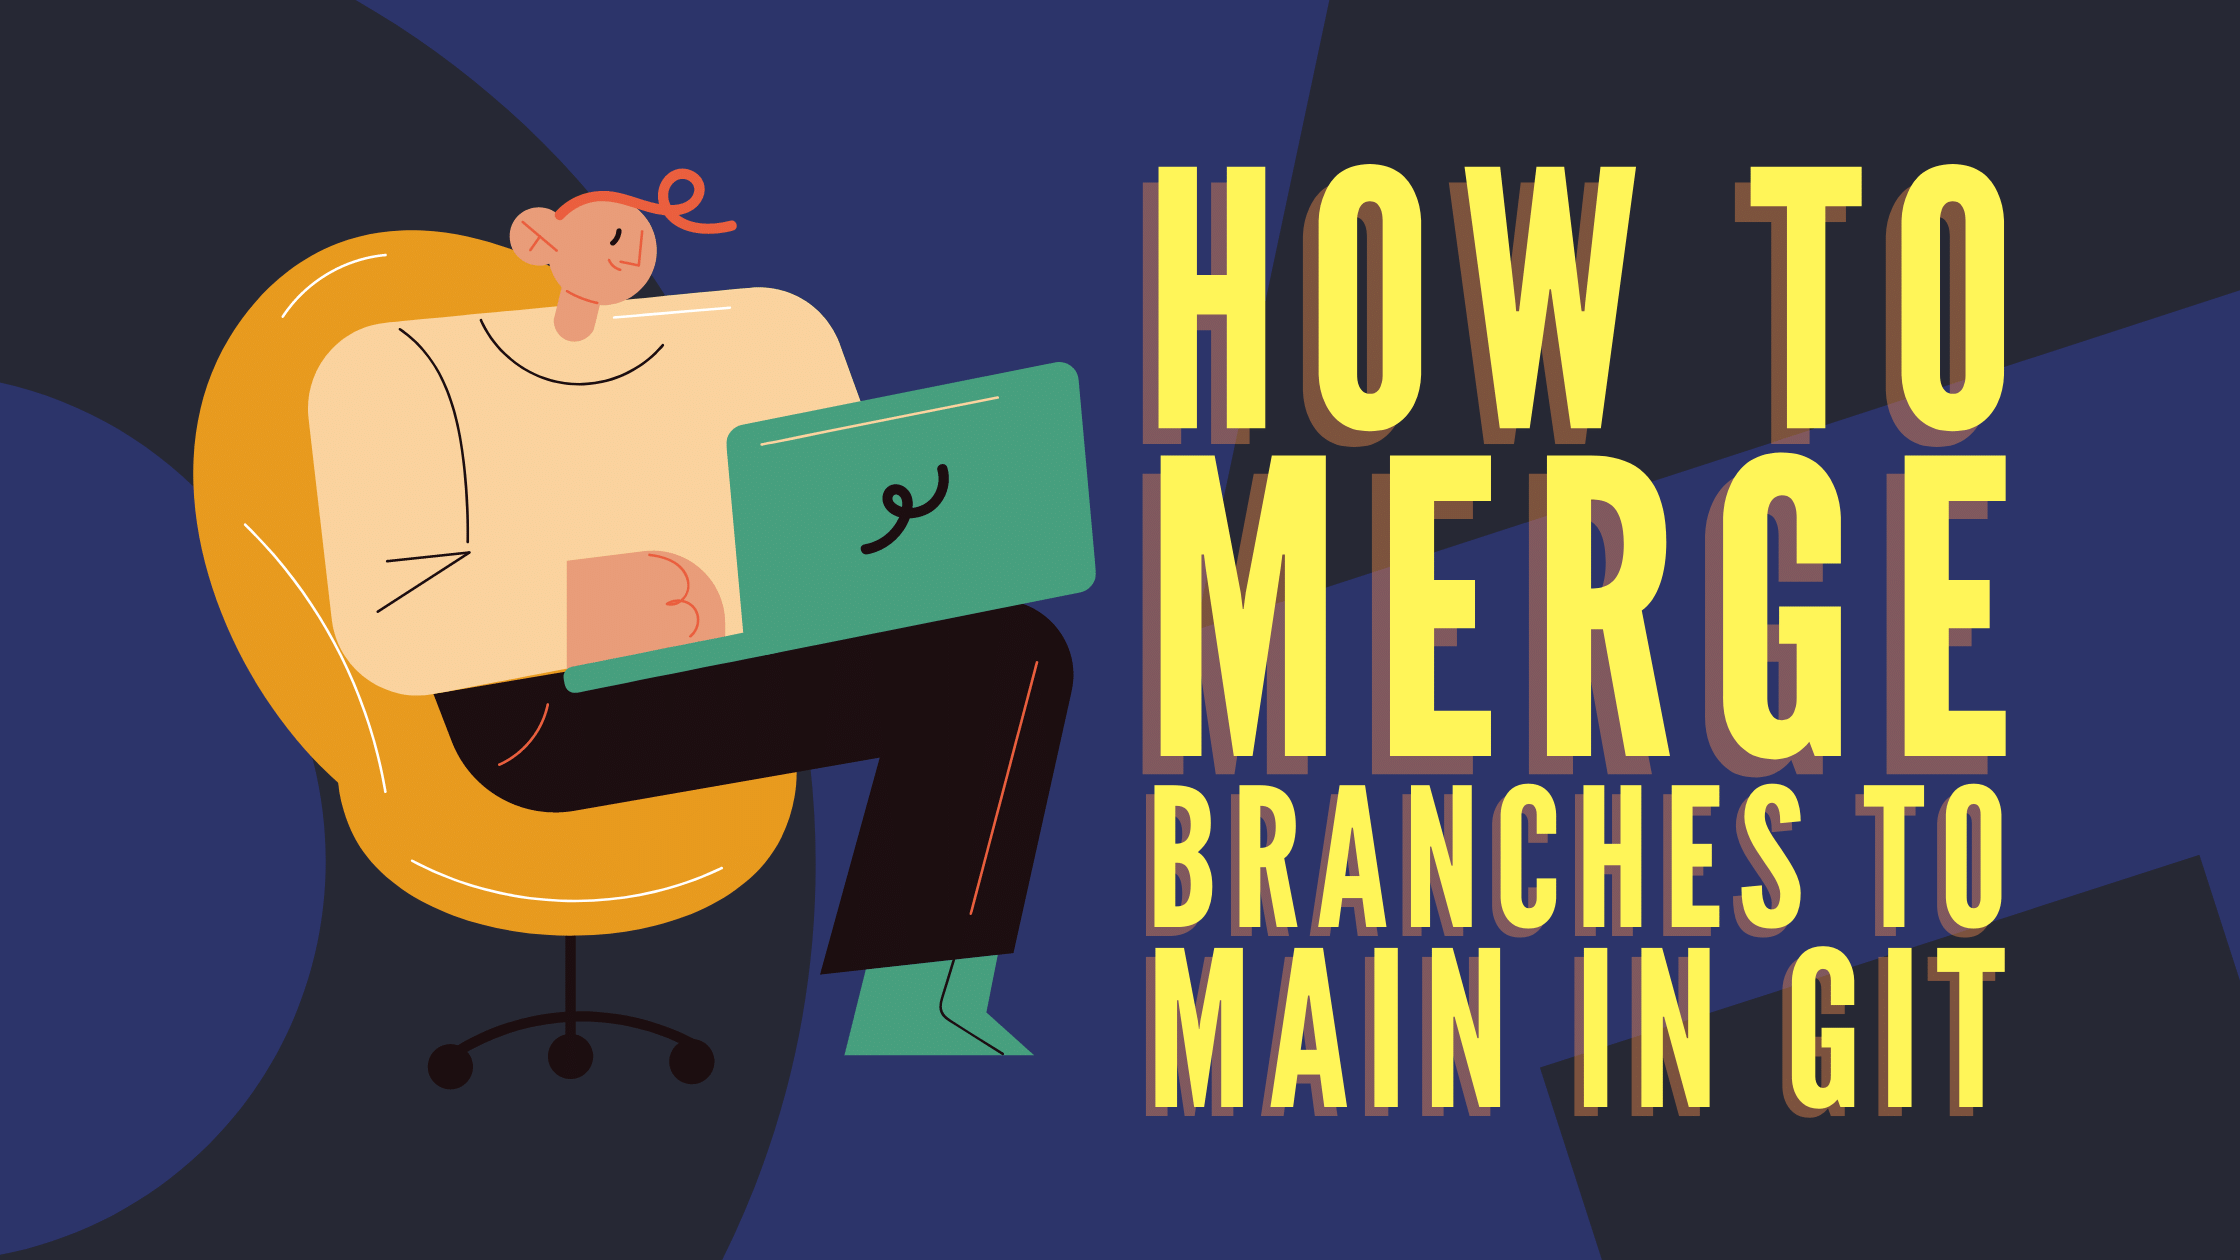 How to Merge Branches to Main in Git